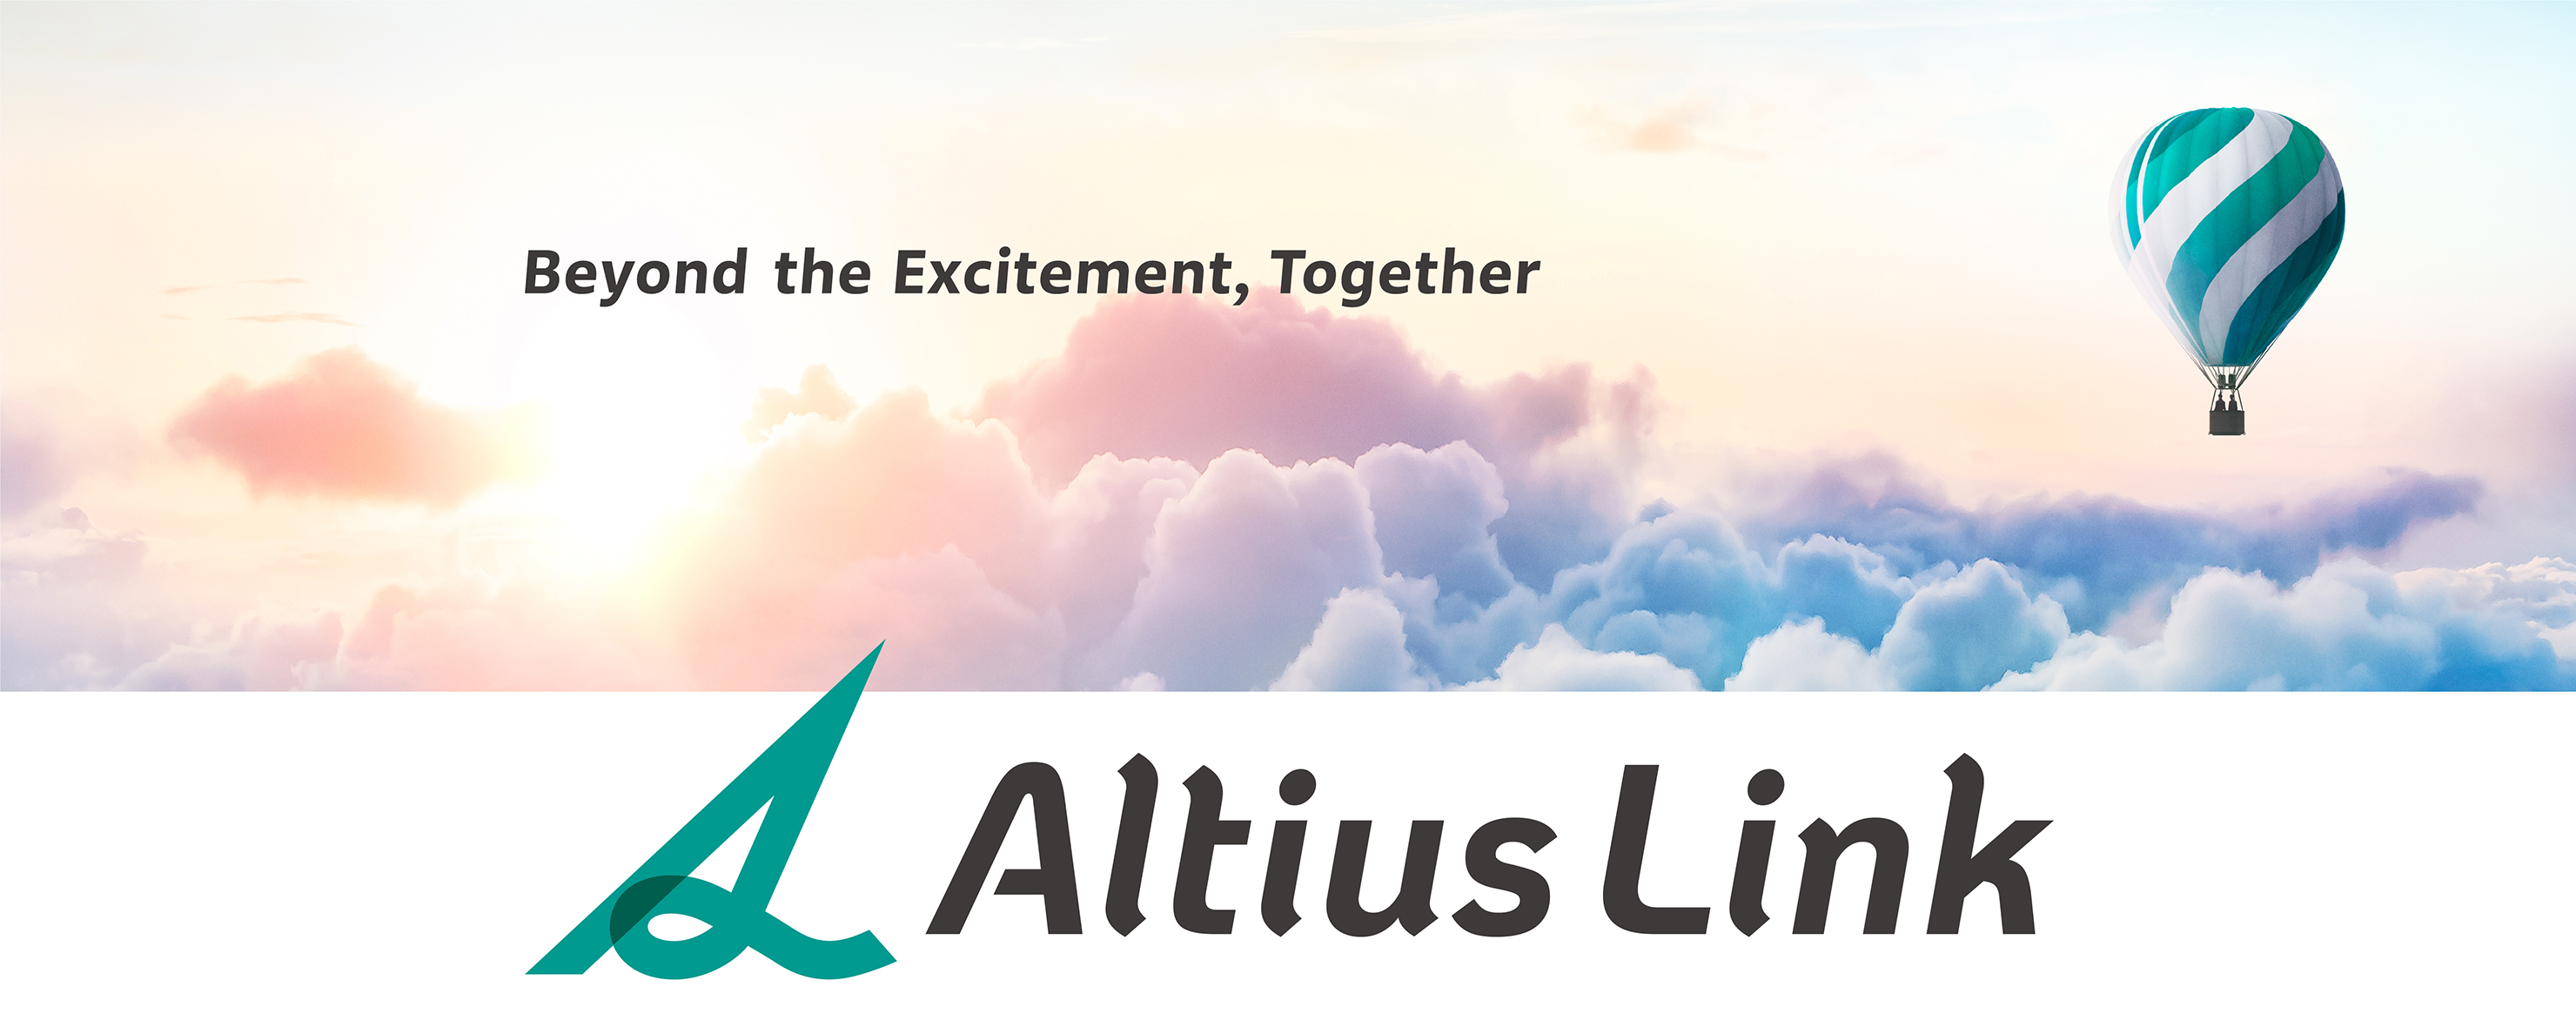 Beyound the Excitement, Together Altius Link